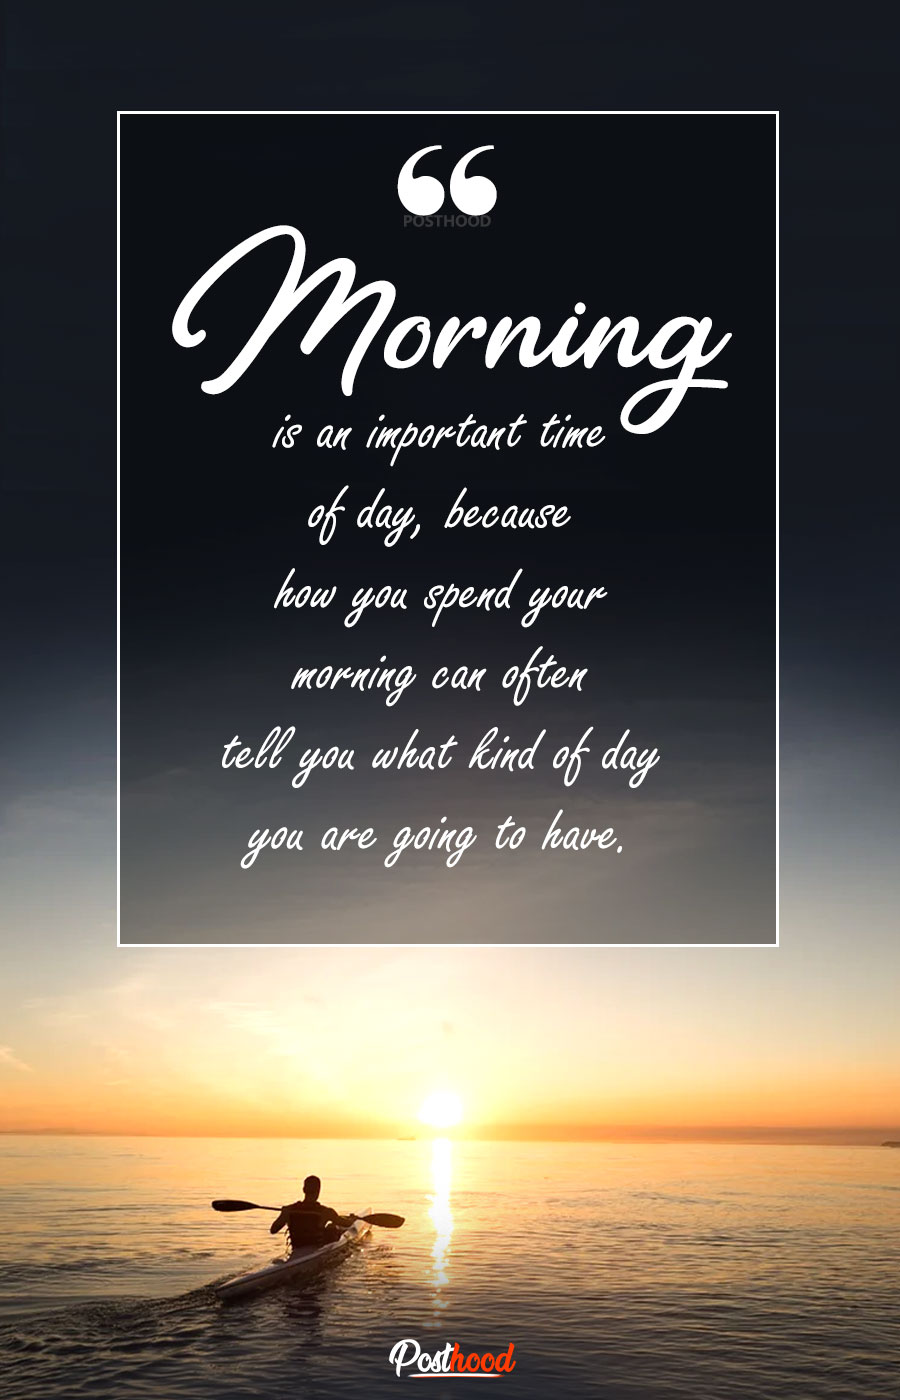 Start your day with these inspirational good morning quotes that will set a positive tone around before you hit your day. Morning motivation quotes.